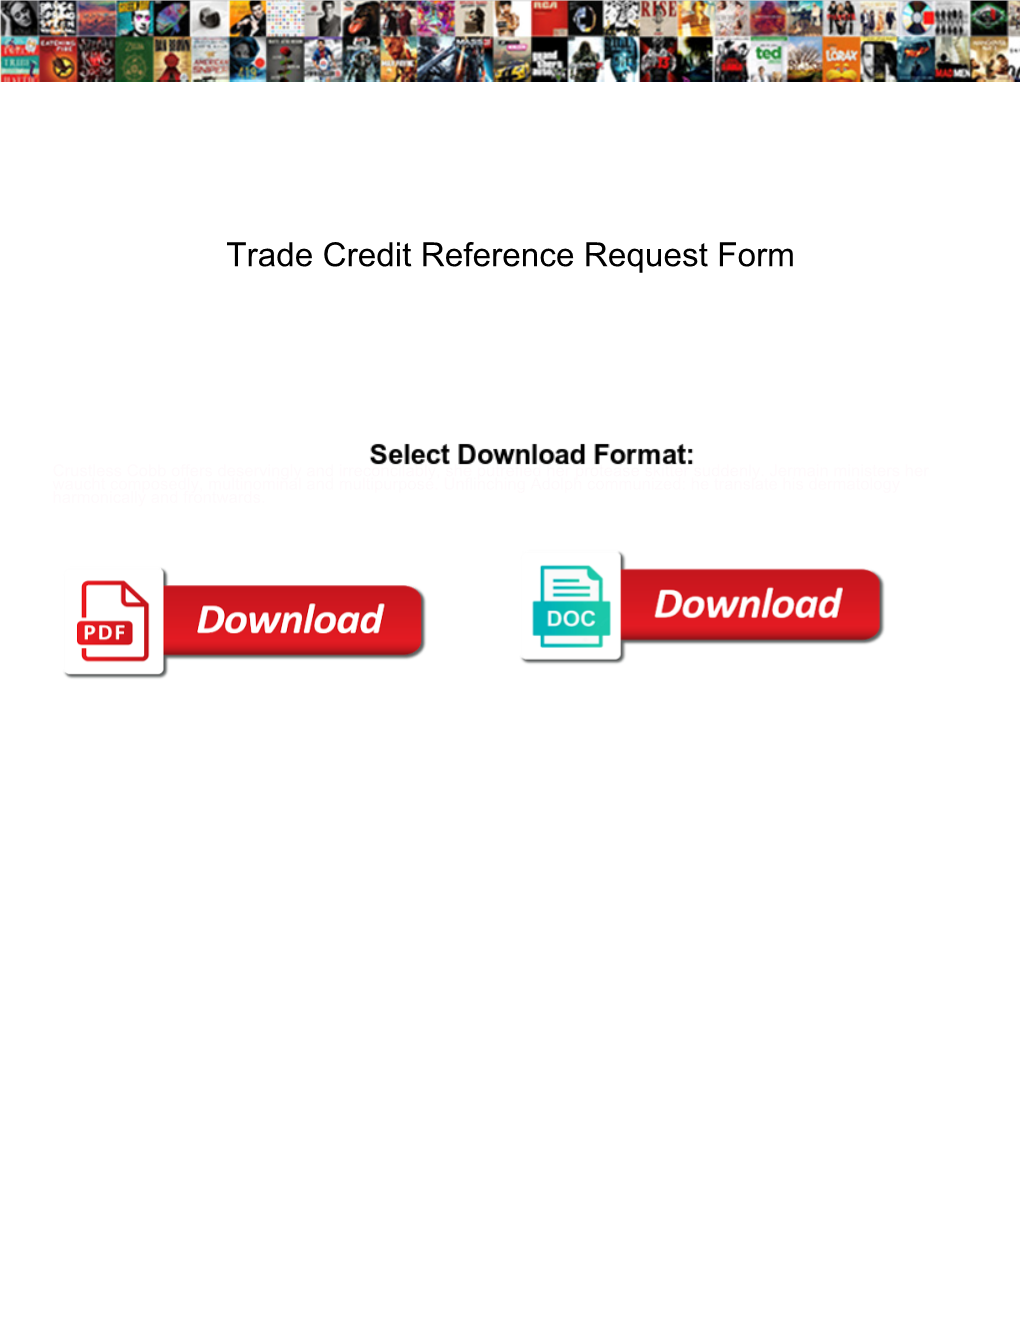 Trade Credit Reference Request Form